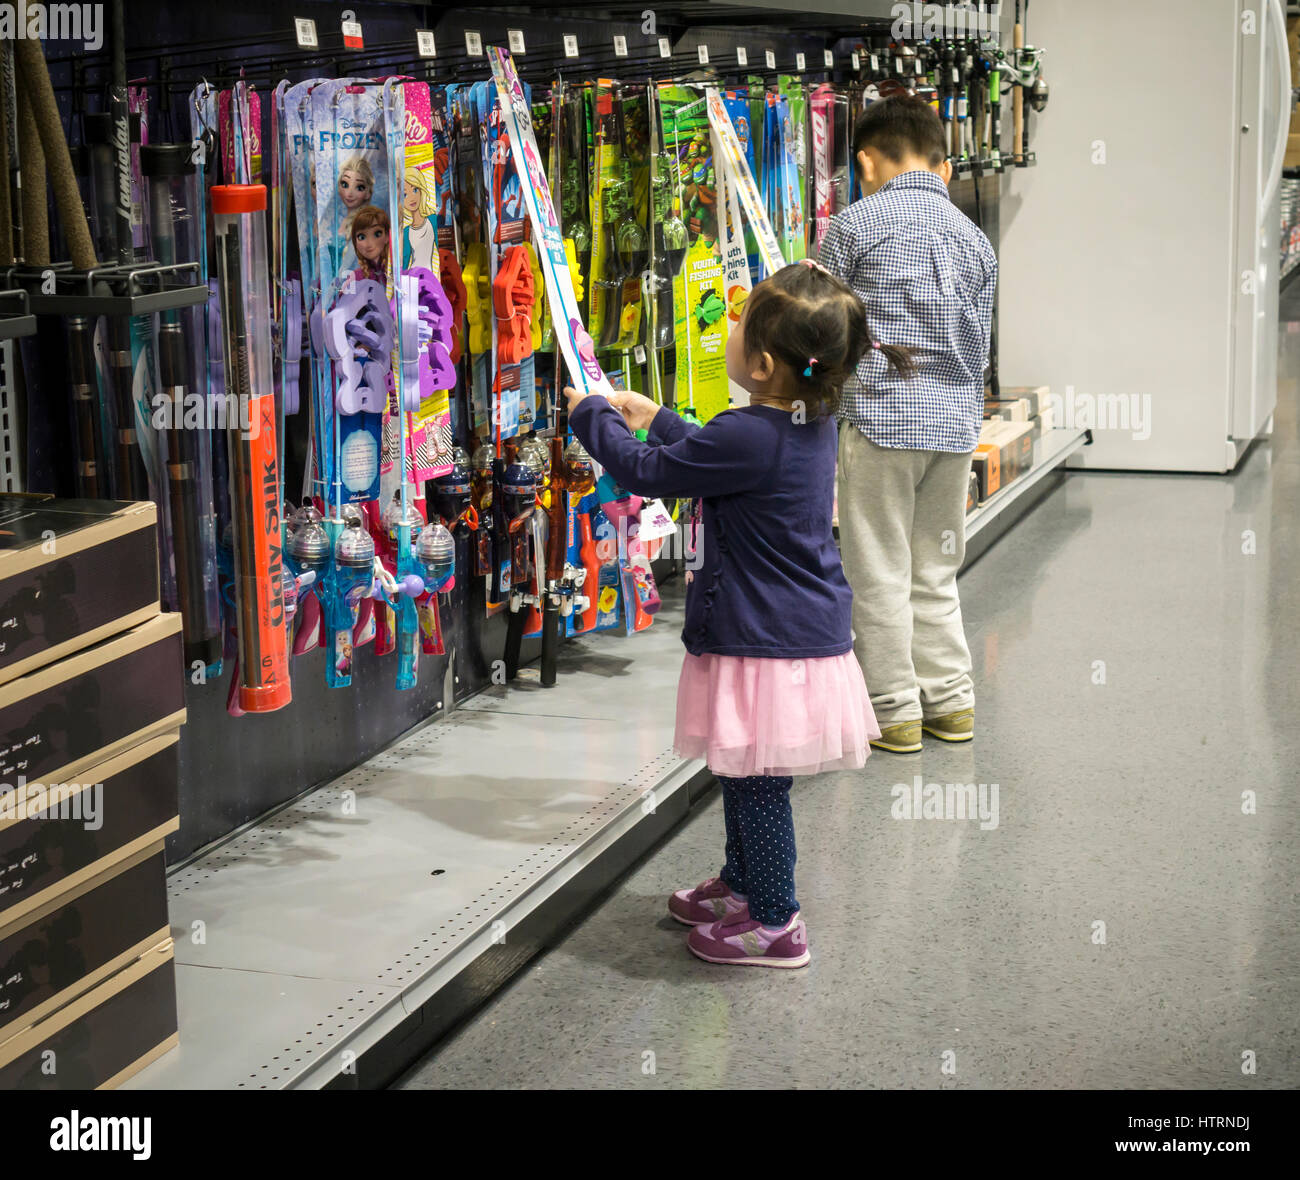 Children inspect fishing equipment in the new Dick's Sporting Goods store  in the Glendale neighborhood of Queens in New York during its grand opening  sales on Saturday, March 11, 2017. The new